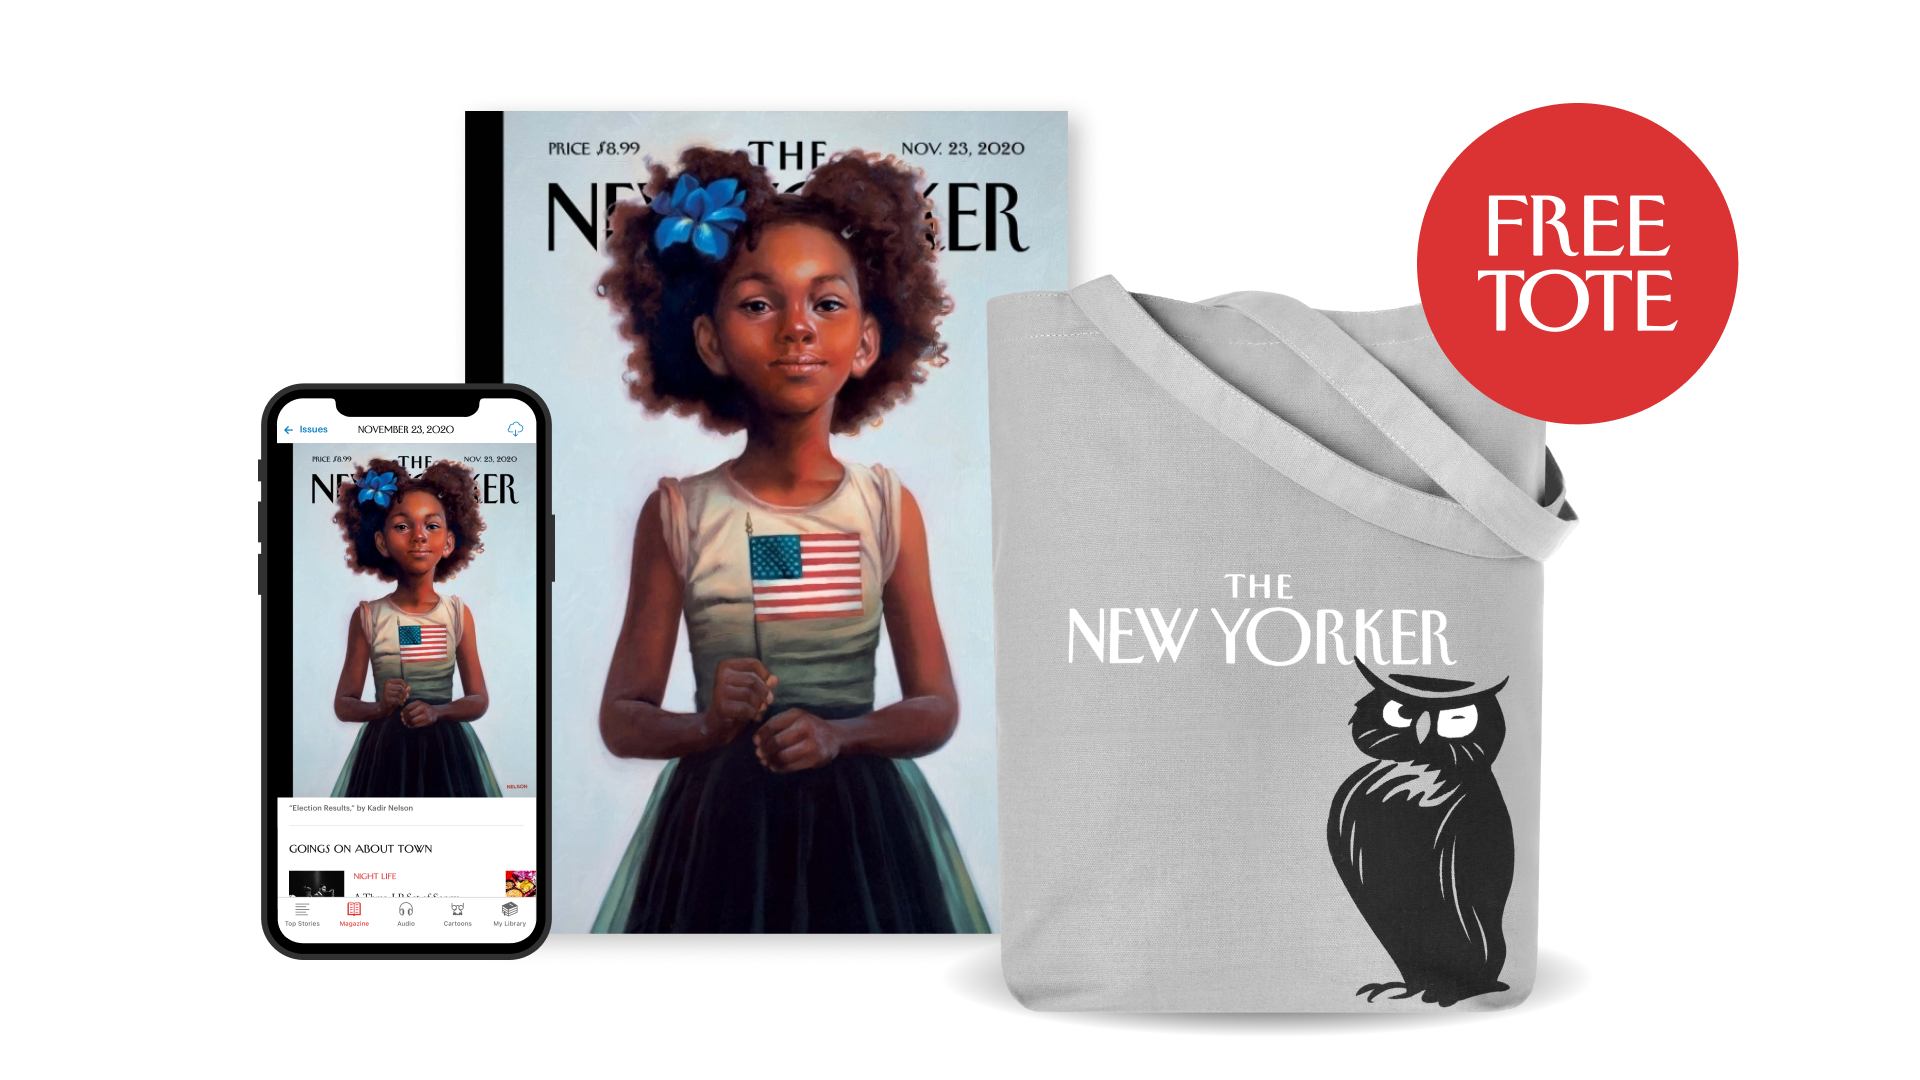 The New Yorker Tote Bag: A Cult Merch Item